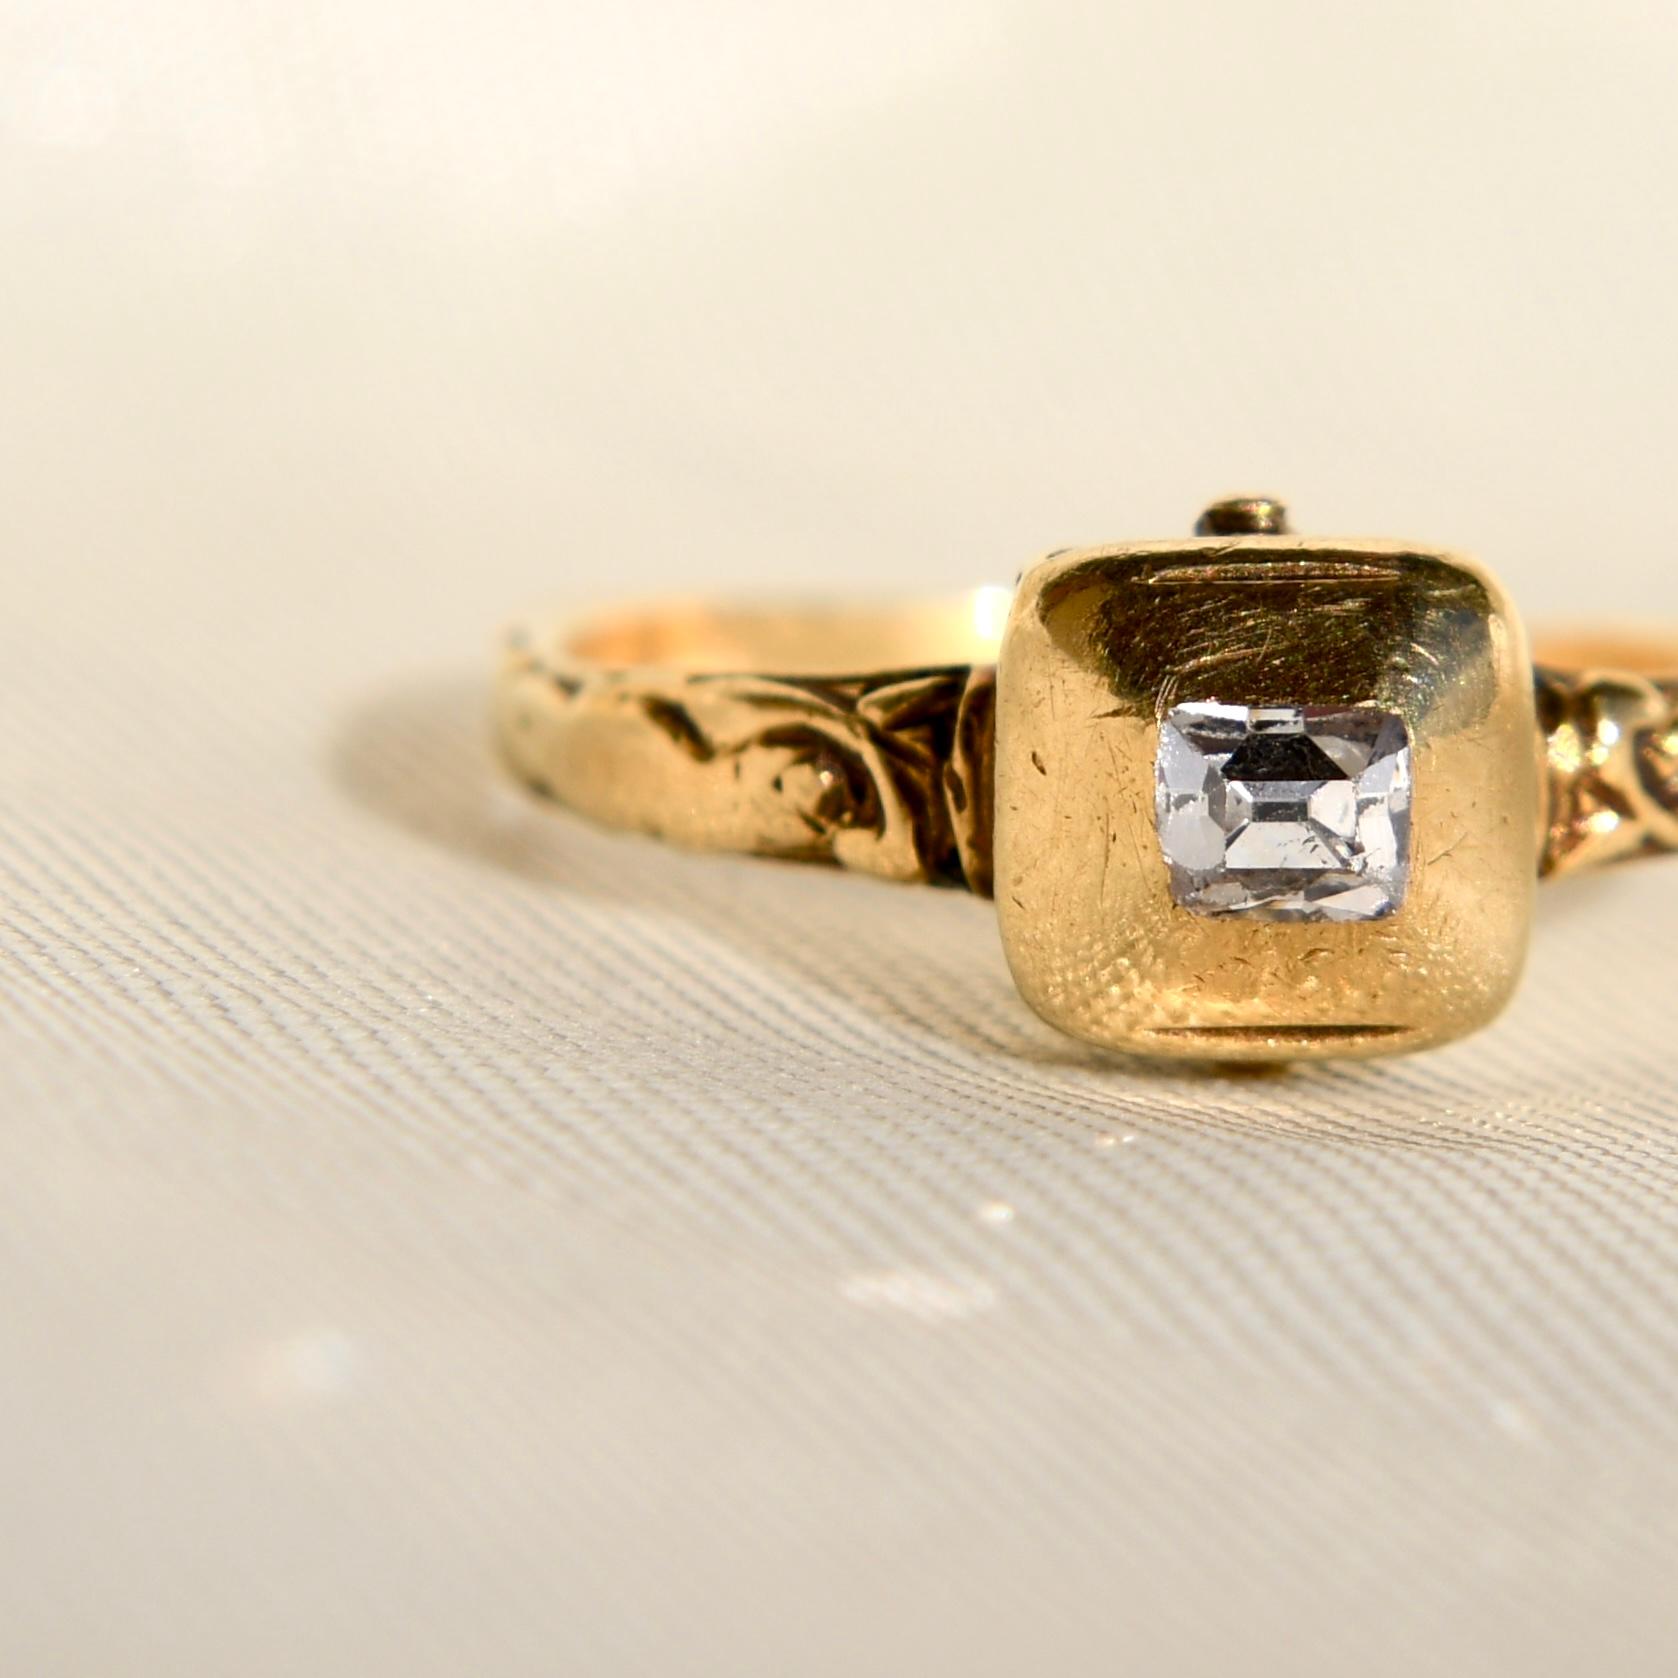 An elegant, high carat, yellow gold Renaissance ring with a table-cut diamond in a rounded box setting with at the back a hatched border and vestigial four-claw setting decorated with black enamel, with a round hoop florally engraved from the